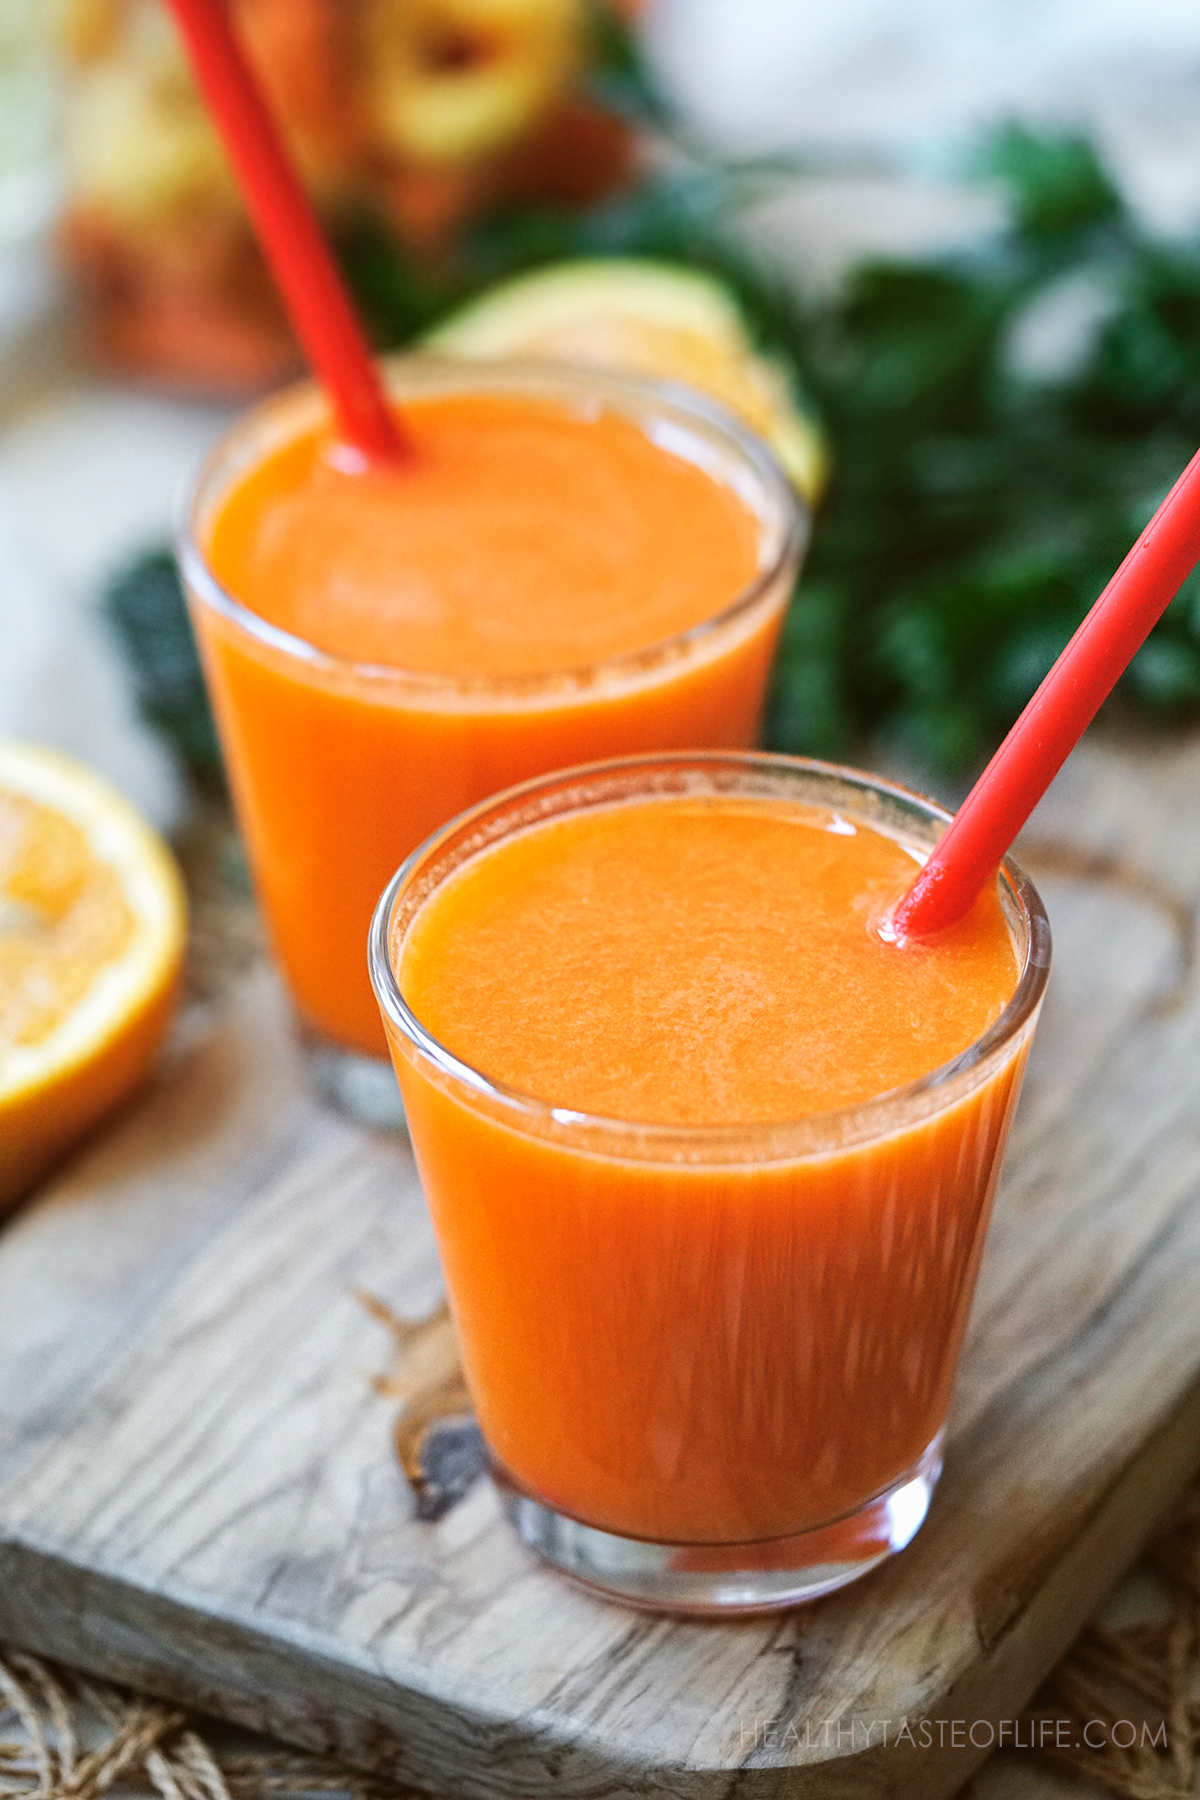 Carrot orange ginger juice - freshly made with a juicer and served in two short glasses.